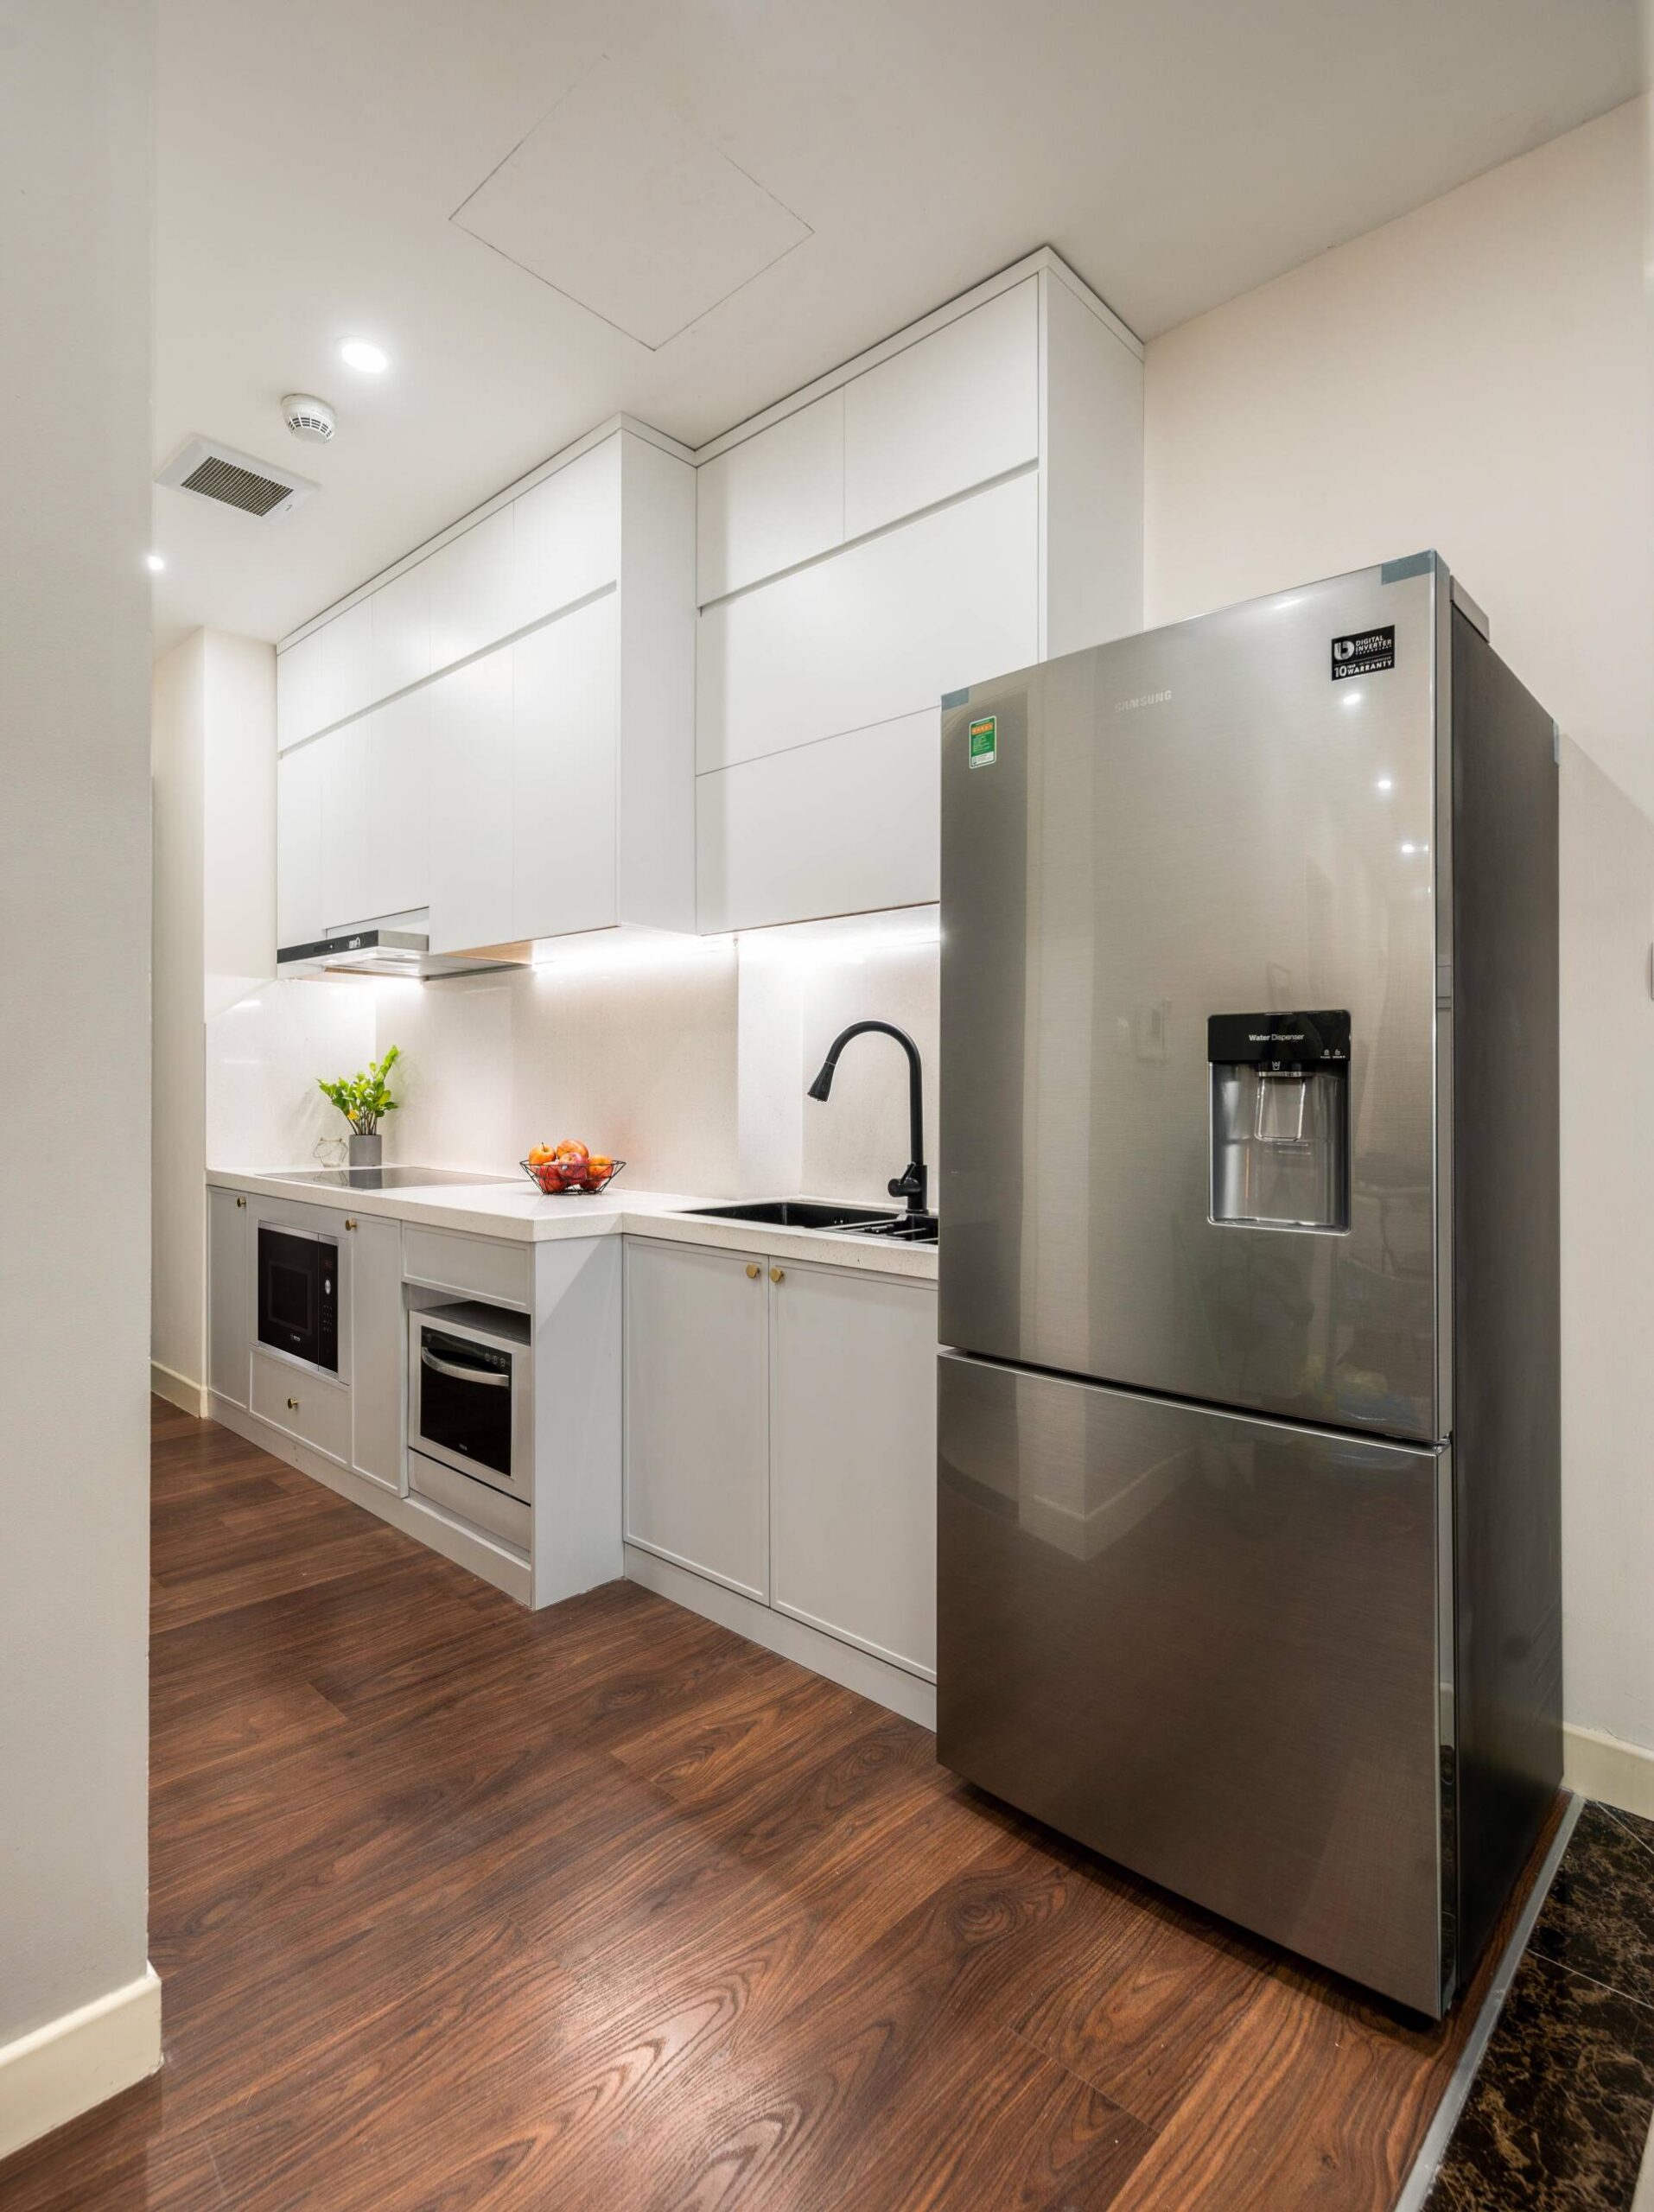 The kitchen uses the main light gray color, contrasting but still in harmony with the brown wooden floor and luxurious gray refrigerator.